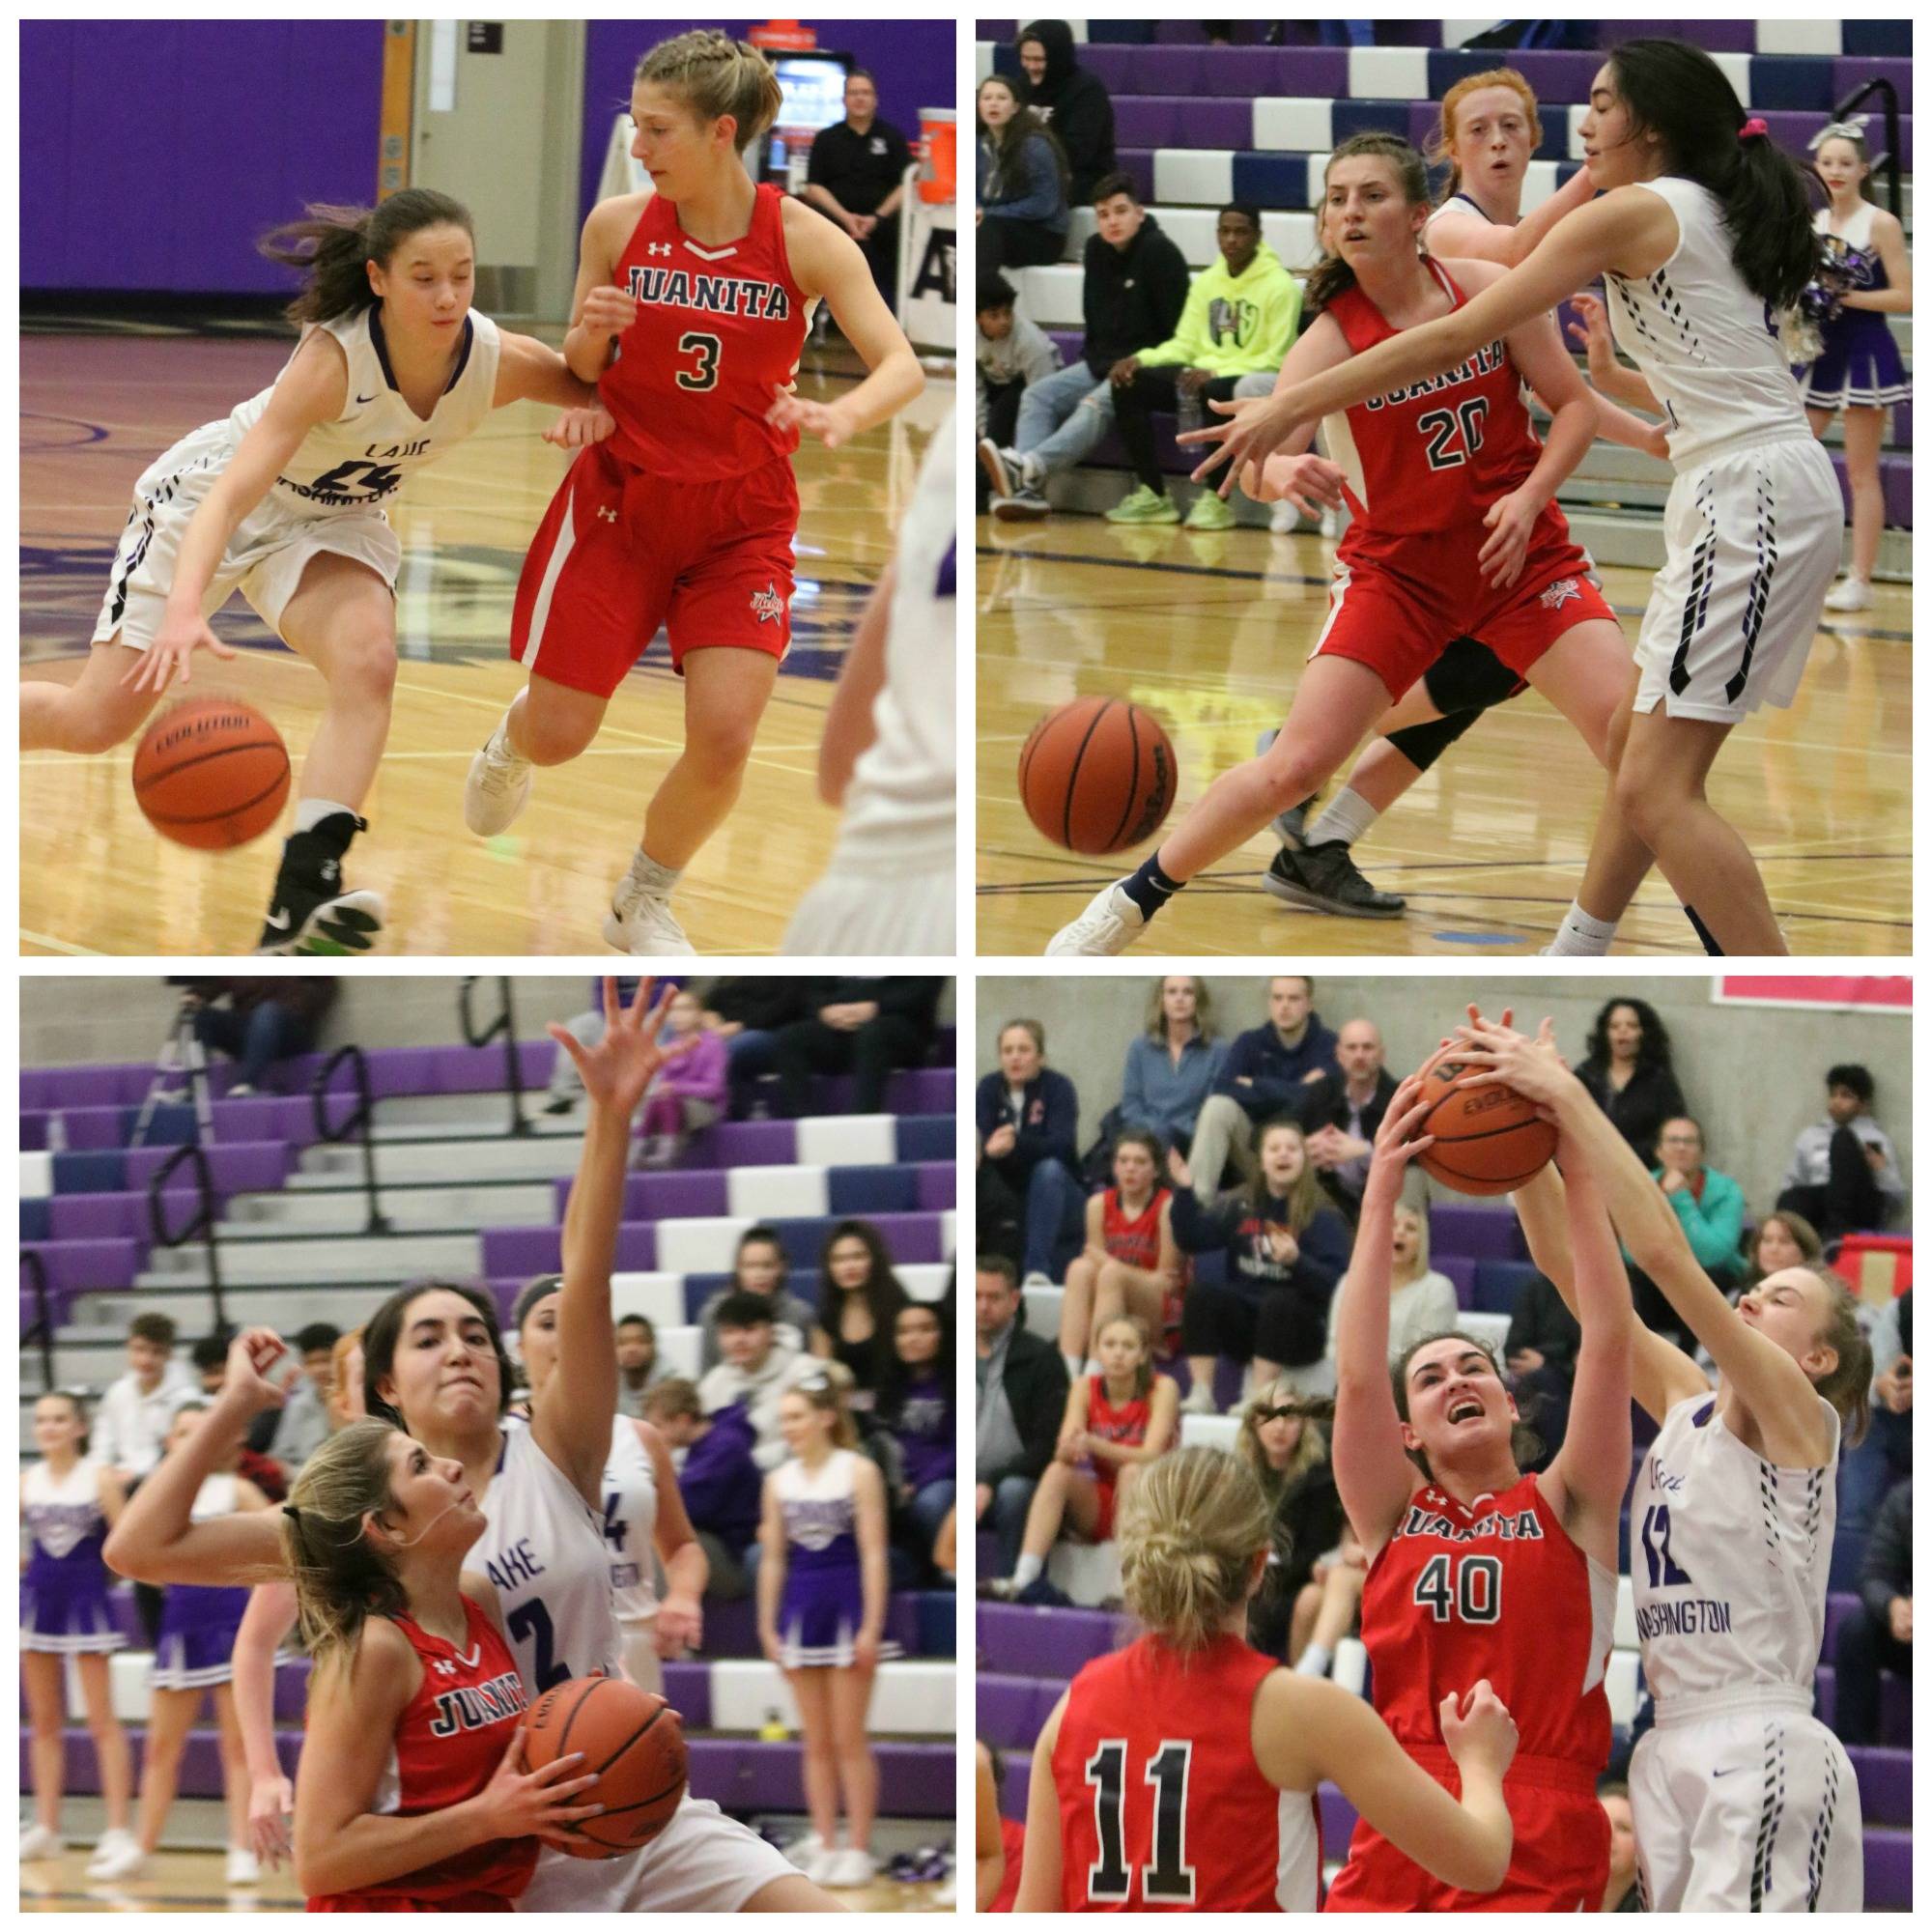 Action galore during the Lake Washington/Juanita game. All photos by Andy Nystrom / staff